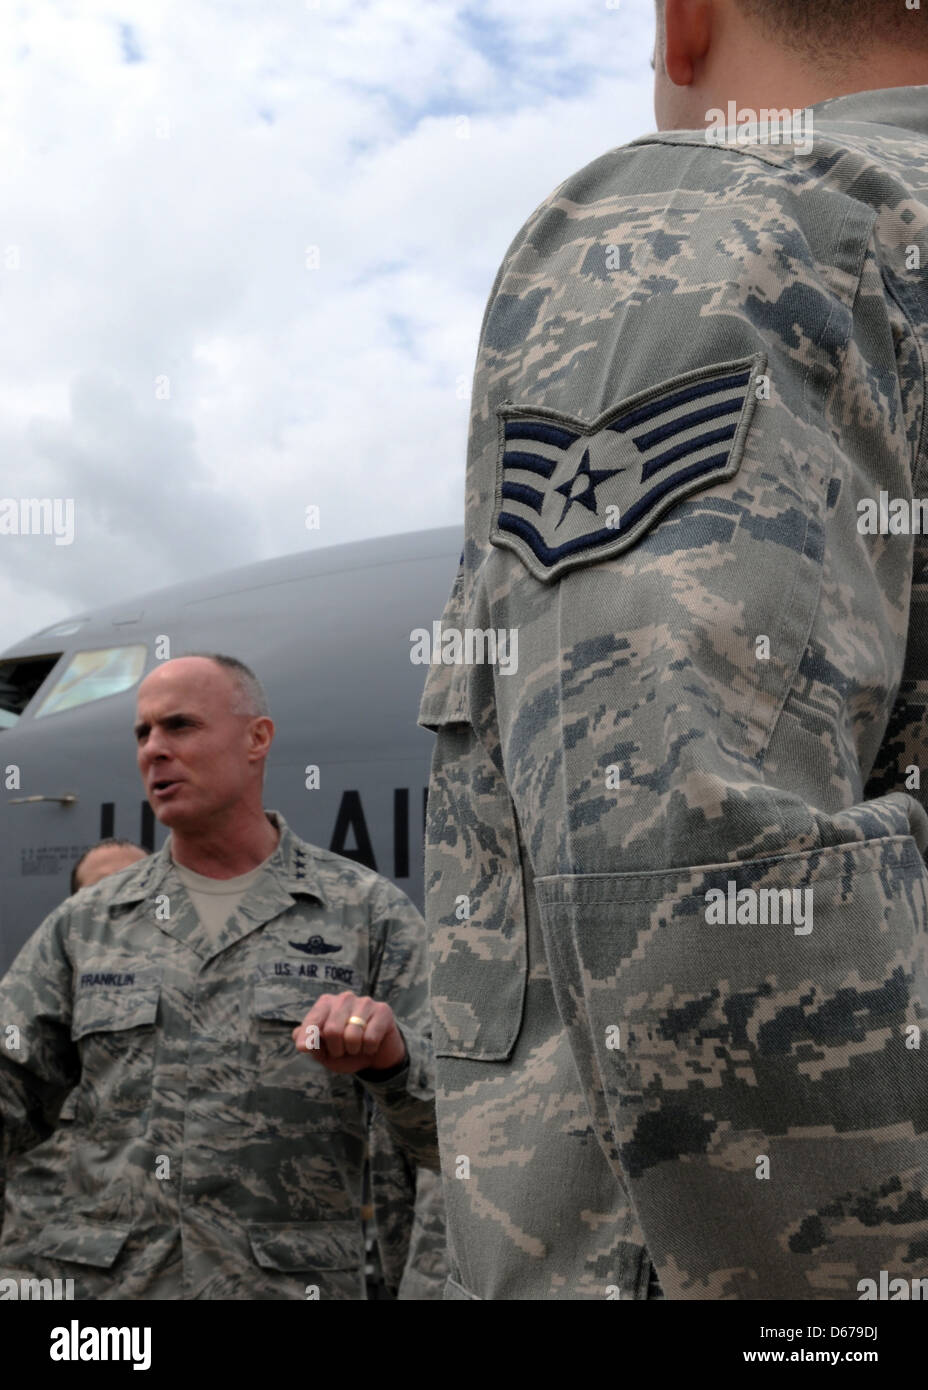 Lt. Gen. Craig A. Franklin, 3rd Air Force and 17th Expeditionary Air Force commander, talks to airmen of the 351st Expeditionary Air Refueling Squadron April 9, 2013, during a visit to the deployed location in Southwest Europe. Franklin was on station to evaluate the 351st EARS' assets and capabilities in addition to talking with airmen in the unit. Stock Photo